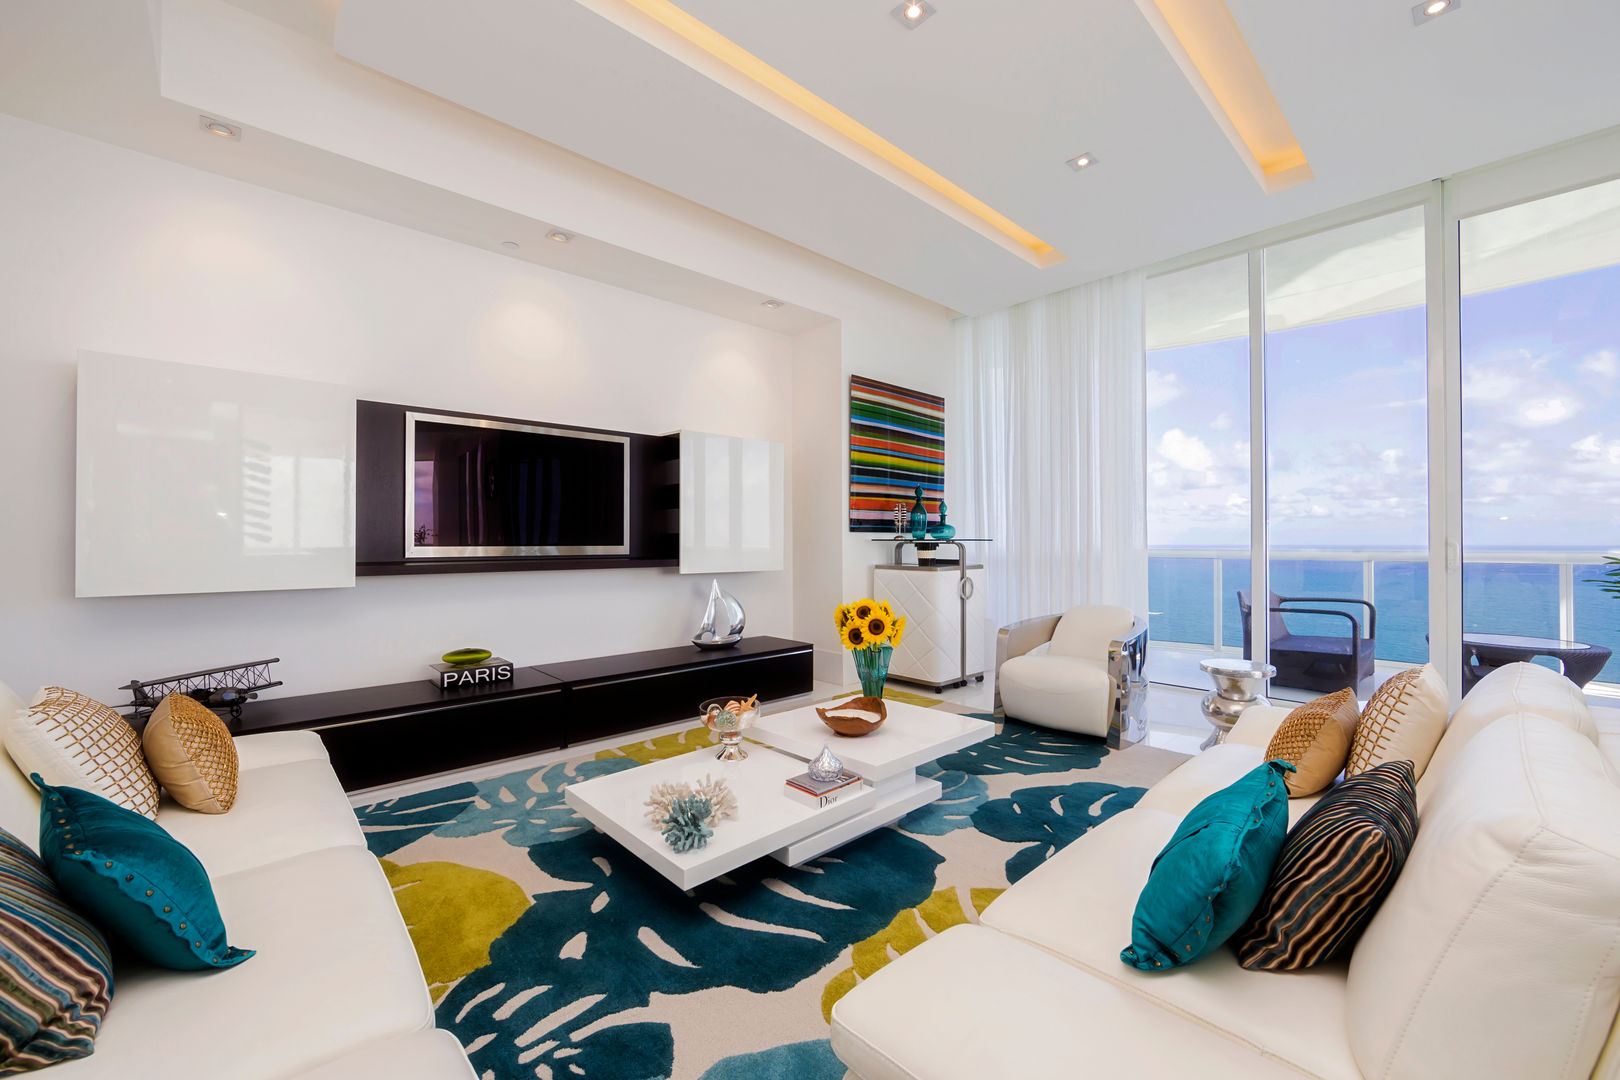 Sunny Isles - Florida - US, Infinity Spaces Infinity Spaces Modern living room